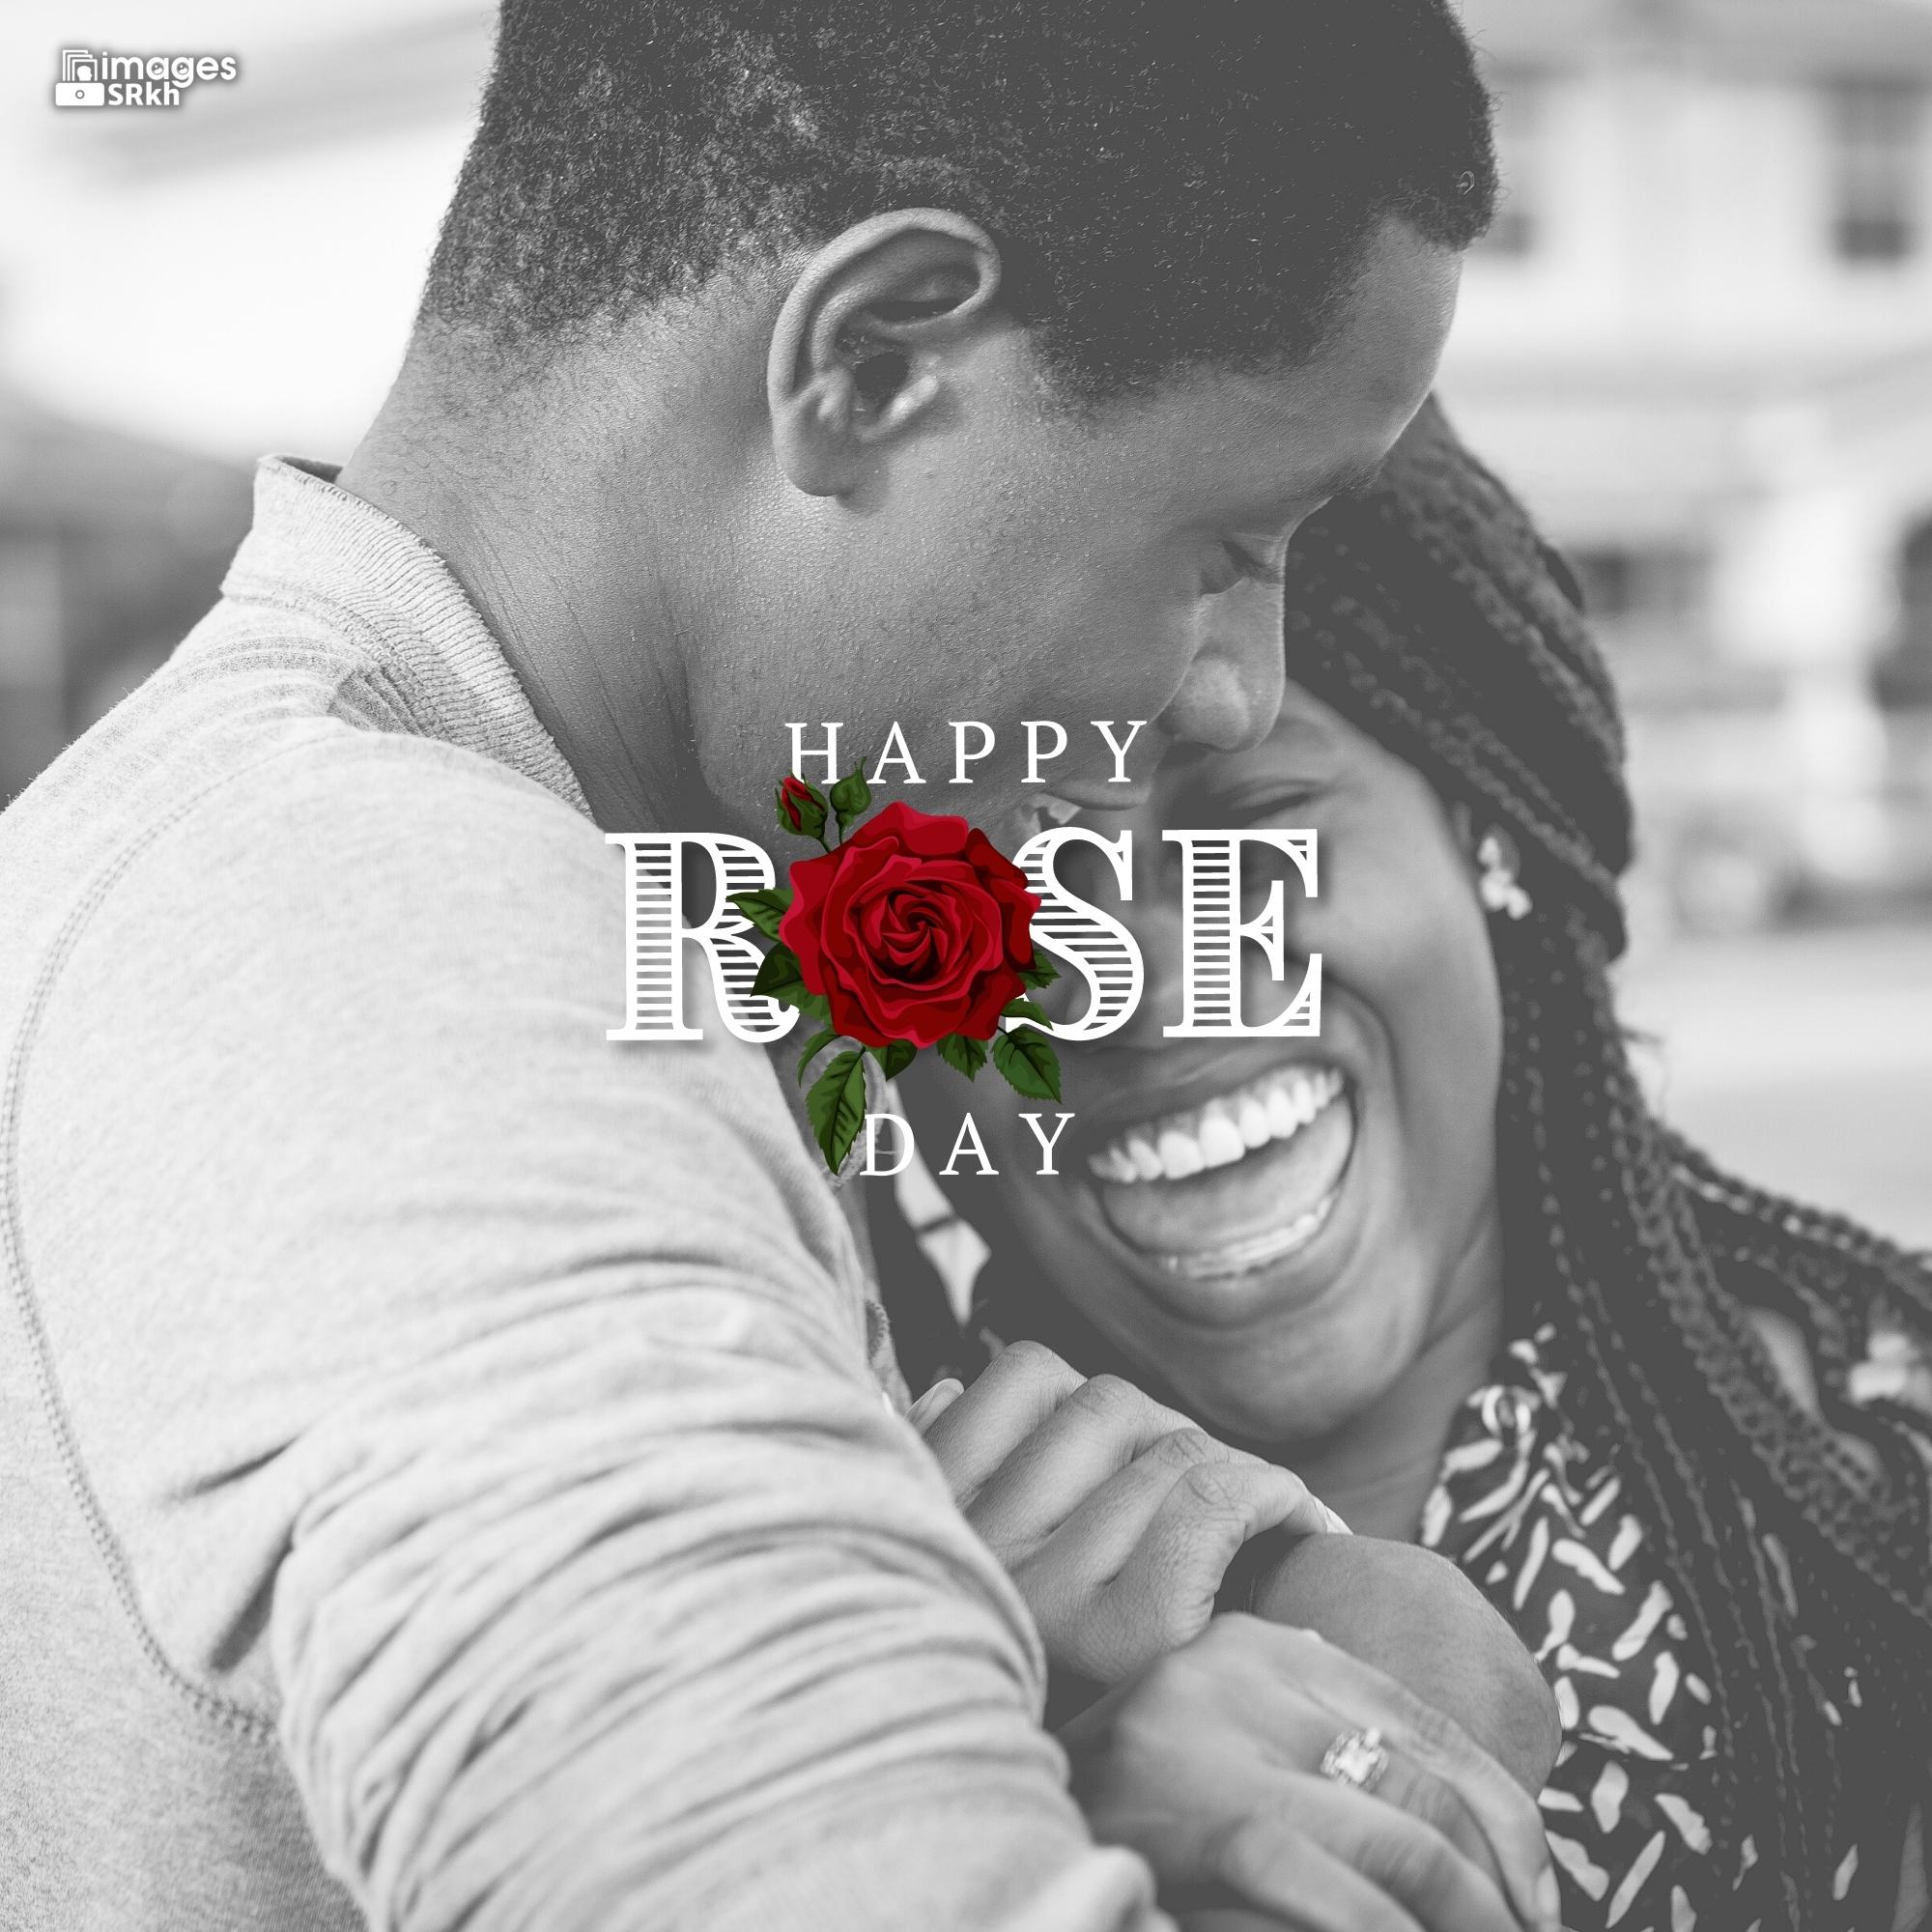 Romantic Rose Day Images Hd Download (14)